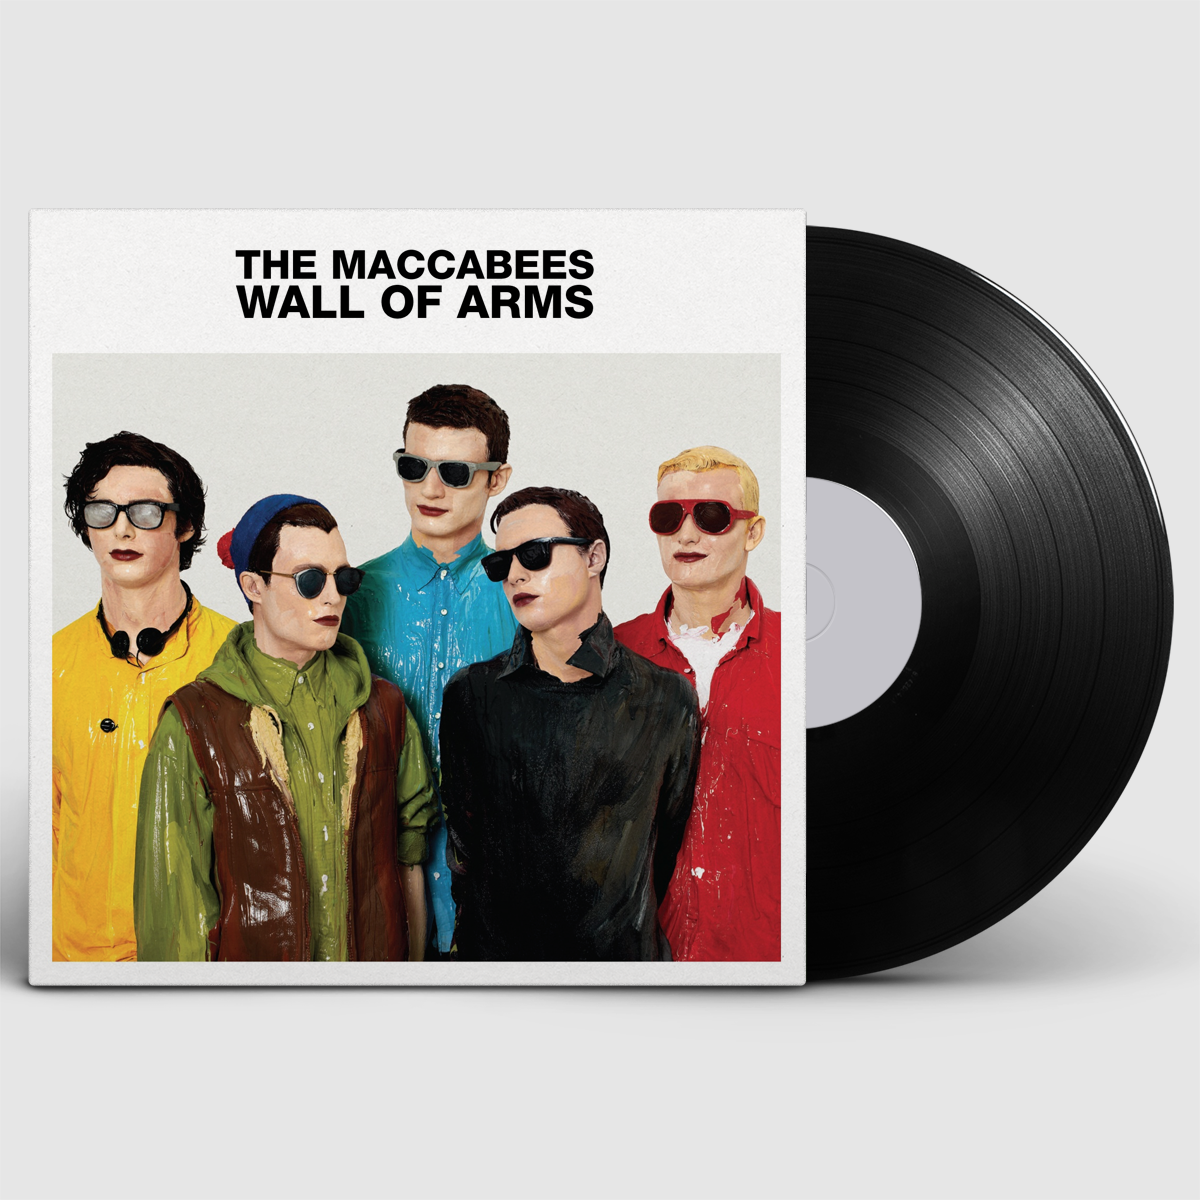 The Maccabees - Wall Of Arms: Vinyl LP